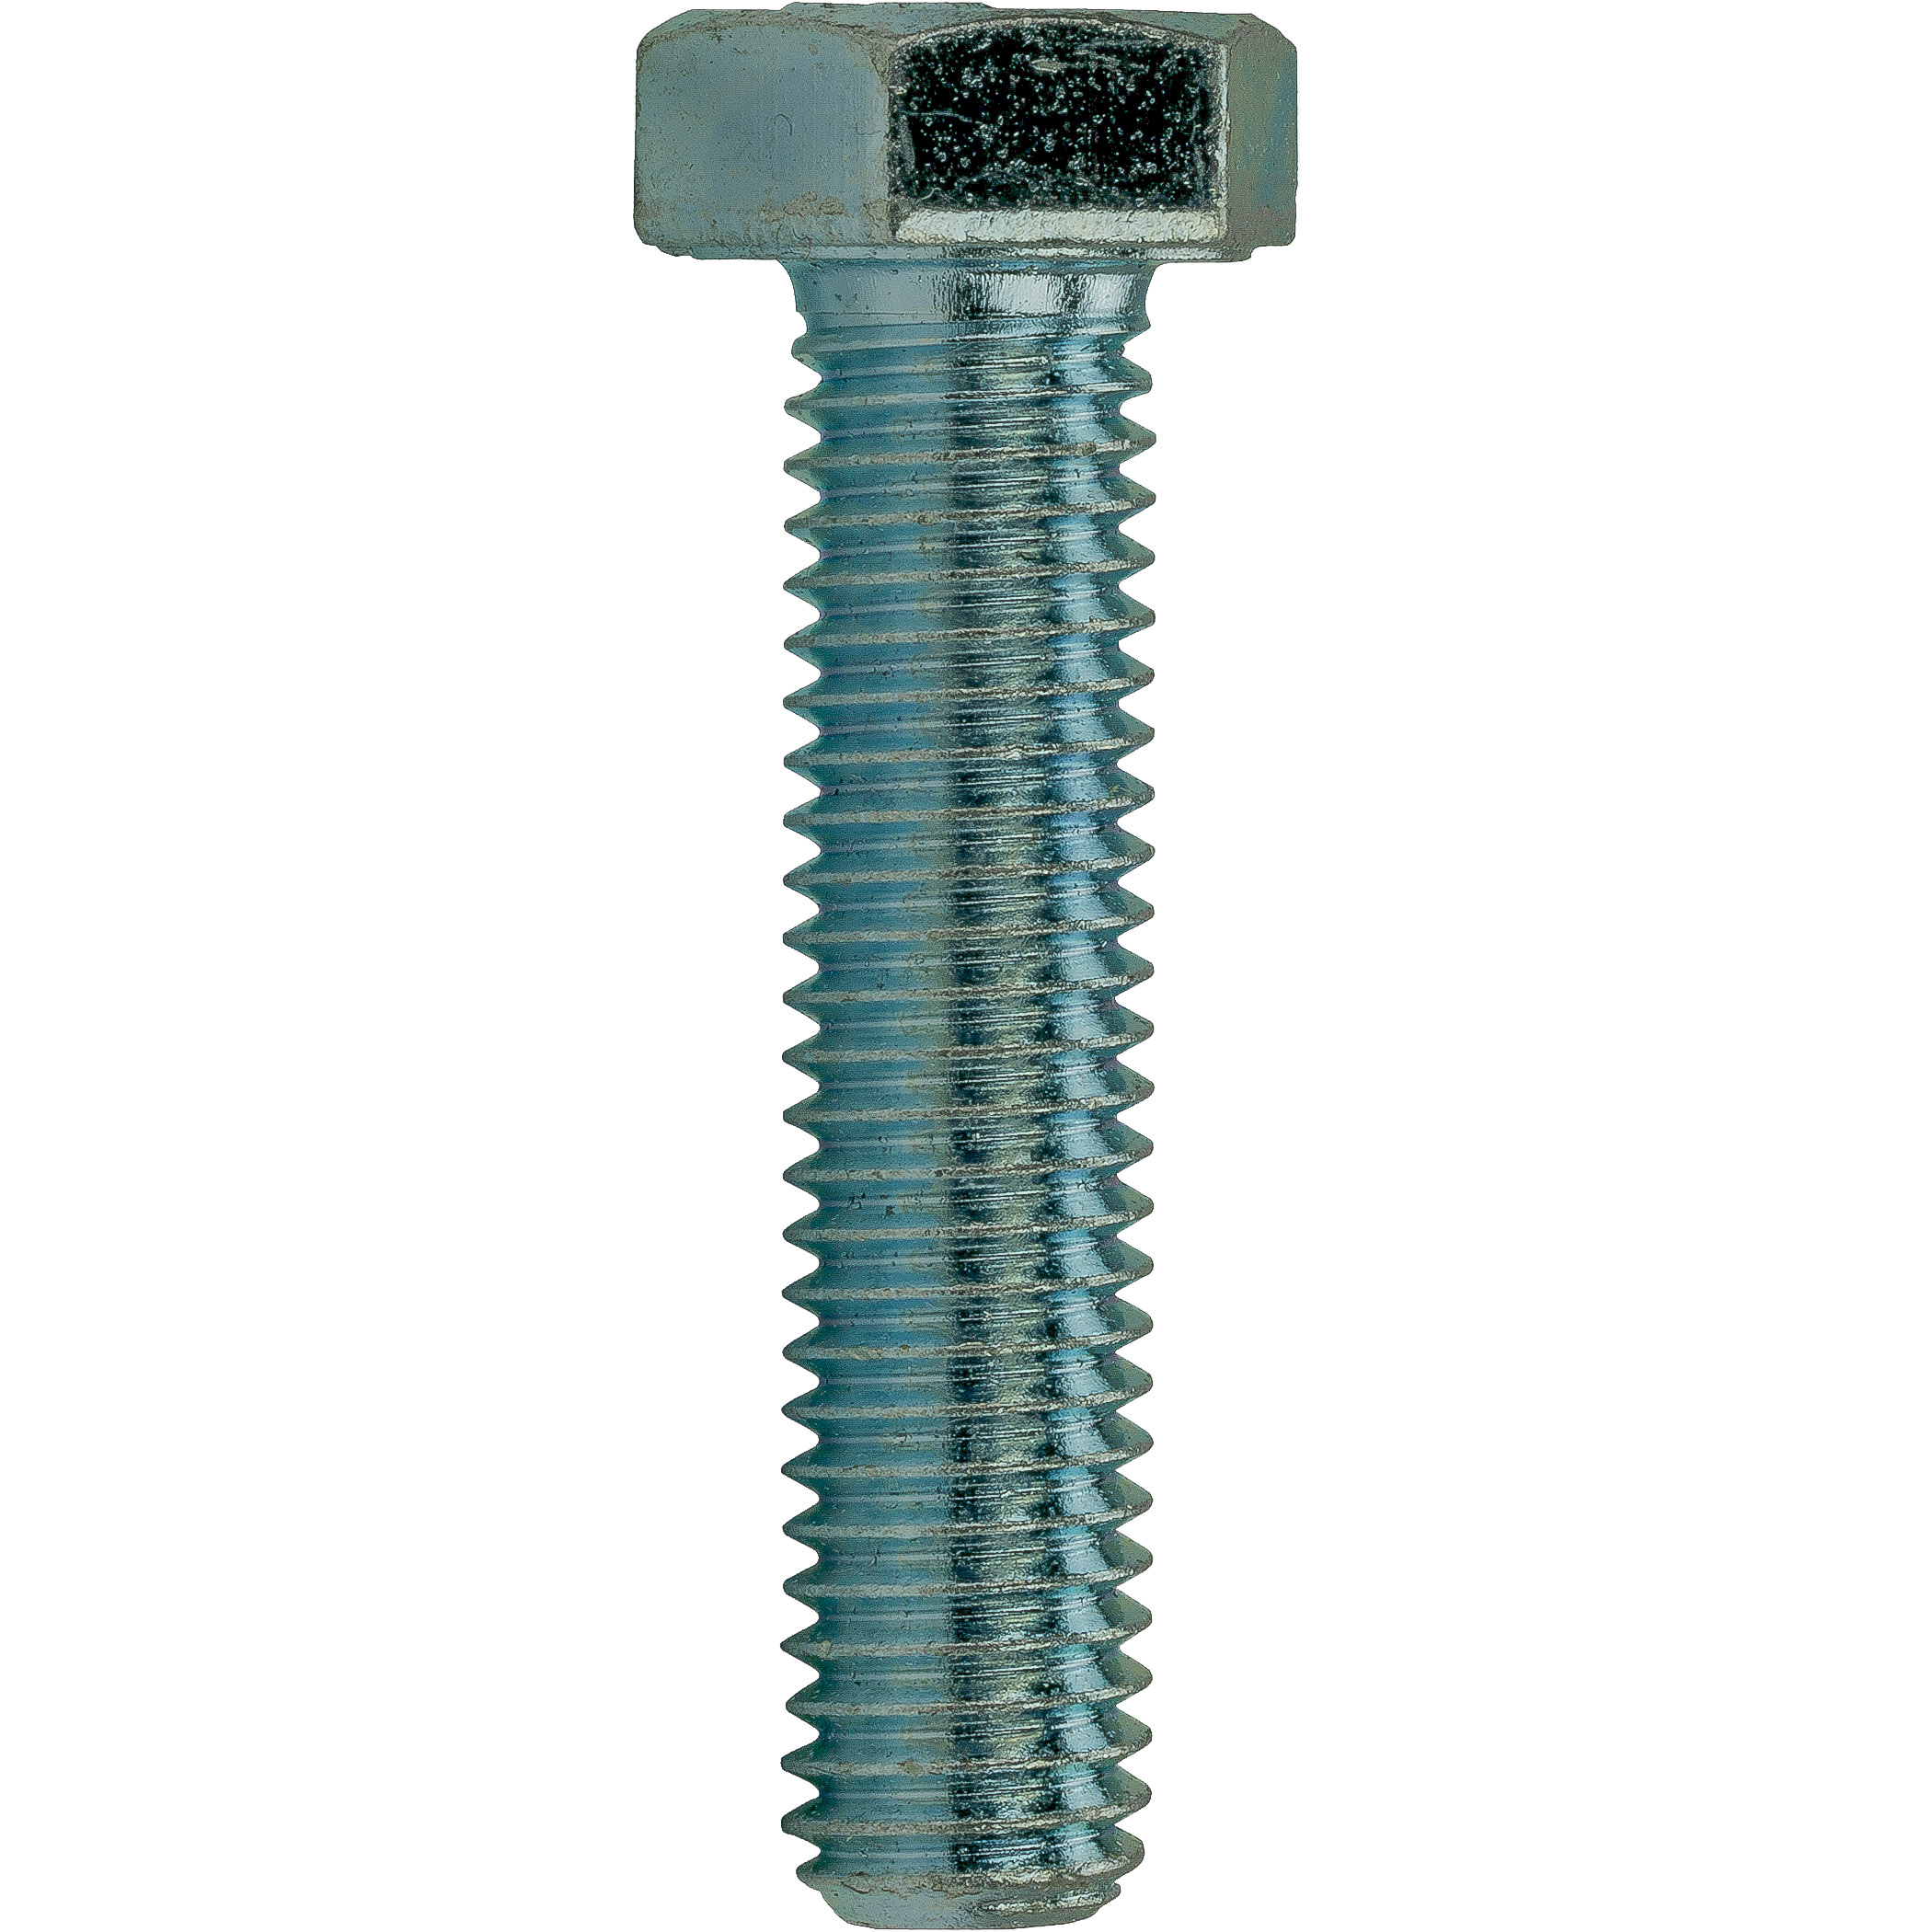 Hegebeck M8 Hex Bolt M8-1.25x50mm Stainless Steel Fully Threaded Hex Tap  Bolts Outer Hex Head Machine Screws Bolts 5 Pcs : : Tools & Home  Improvement